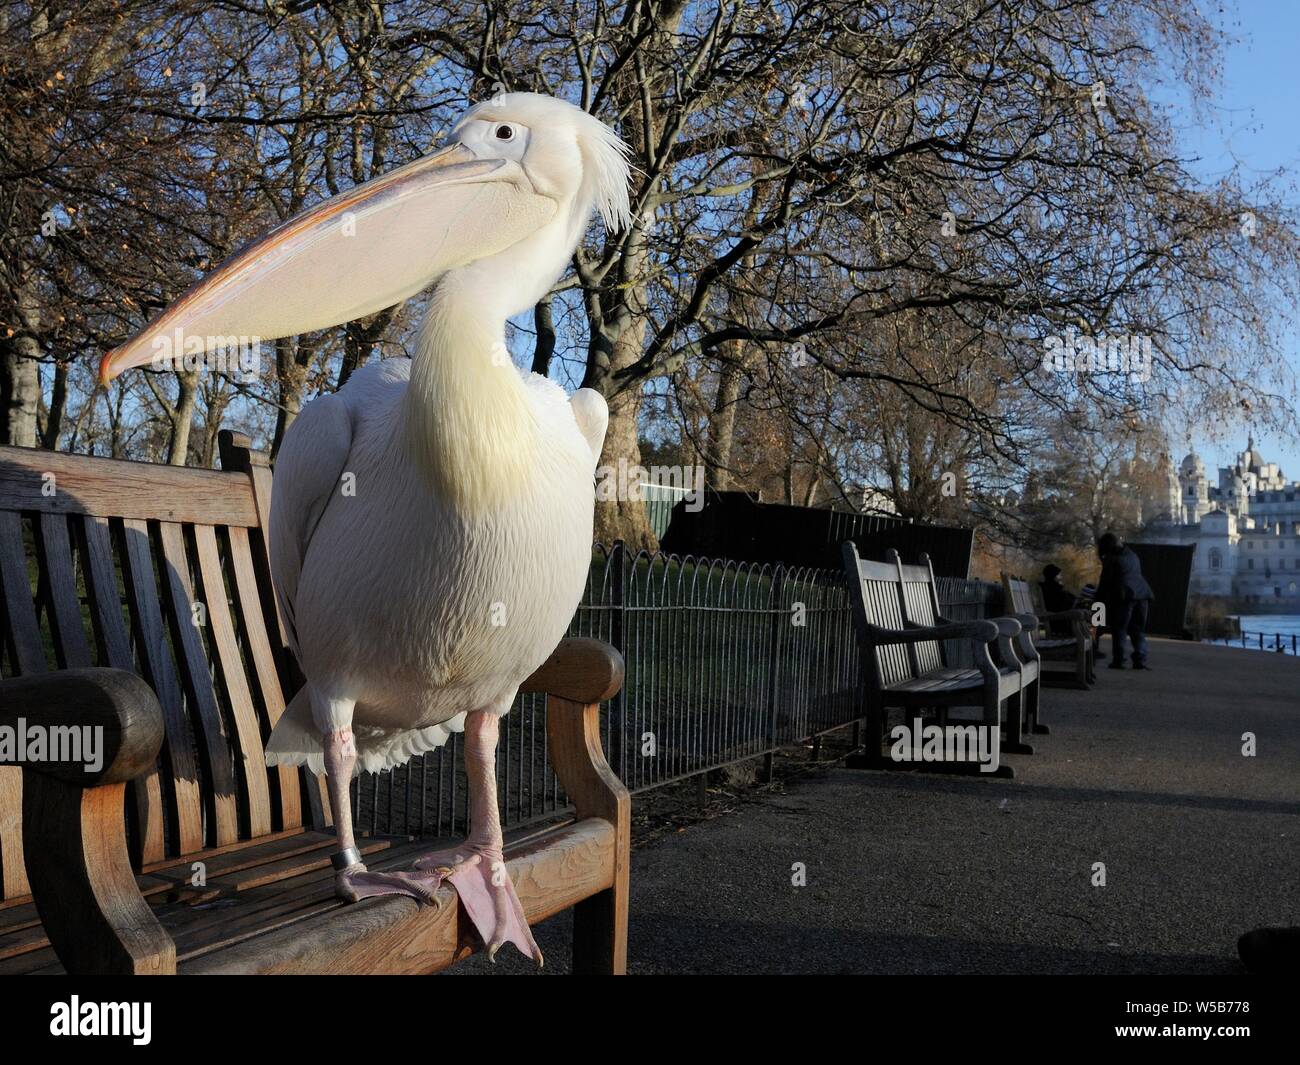 Great white / Eastern white pelican (Pelecanus onocrotalus) standing on bench in morning sunshine to warm up, St.James's Park, London UK, January. Stock Photo